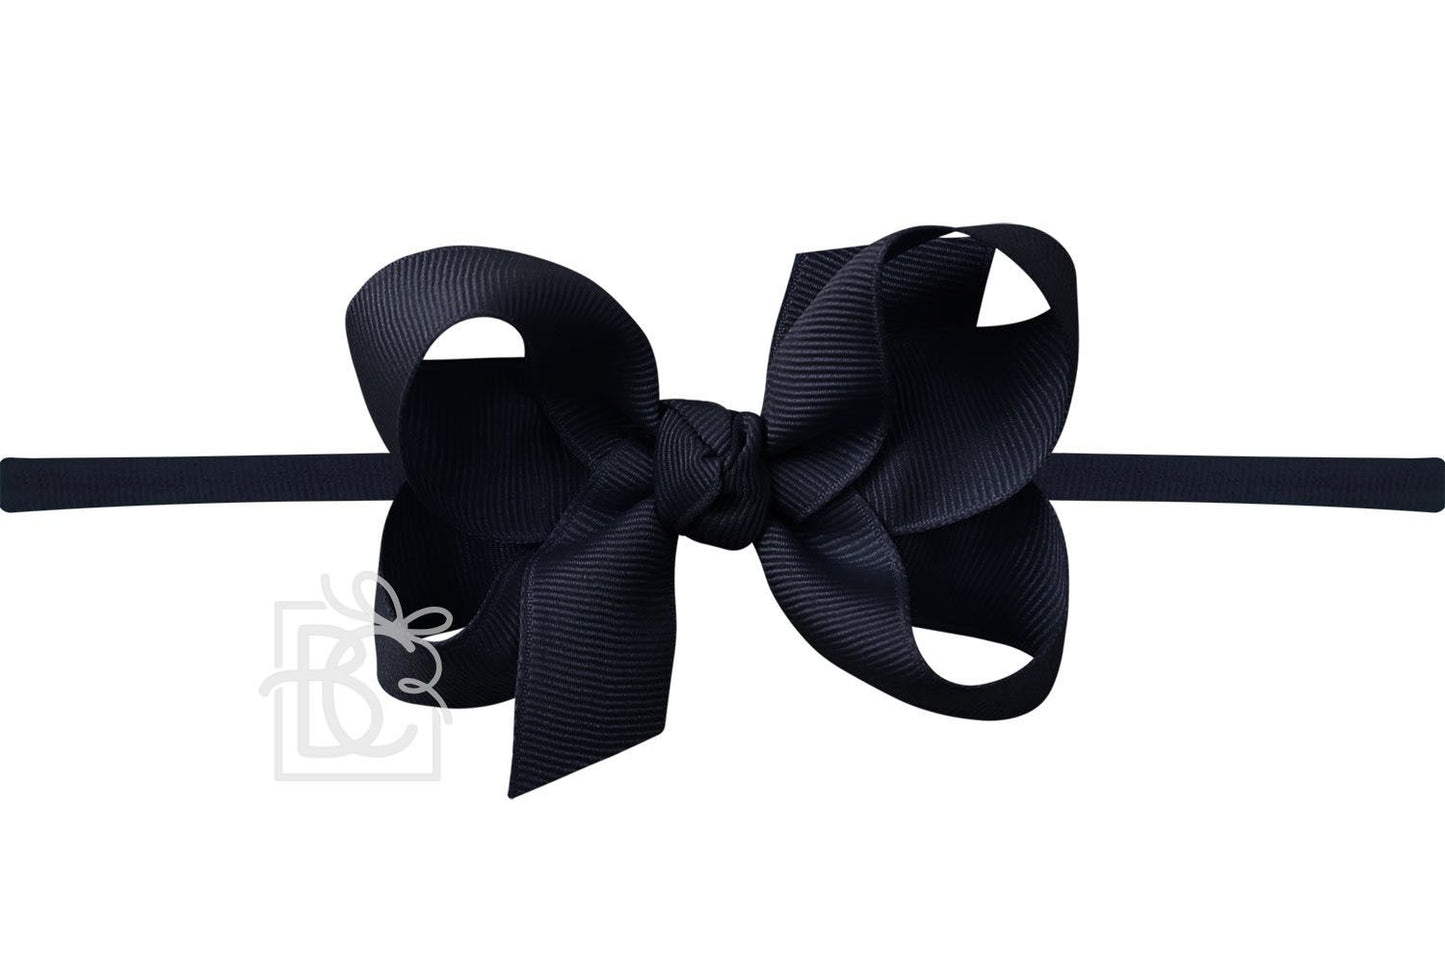 Beyond Creations’ Quarter Inch Pantyhose Headband with our Signature Grosgrain Bow